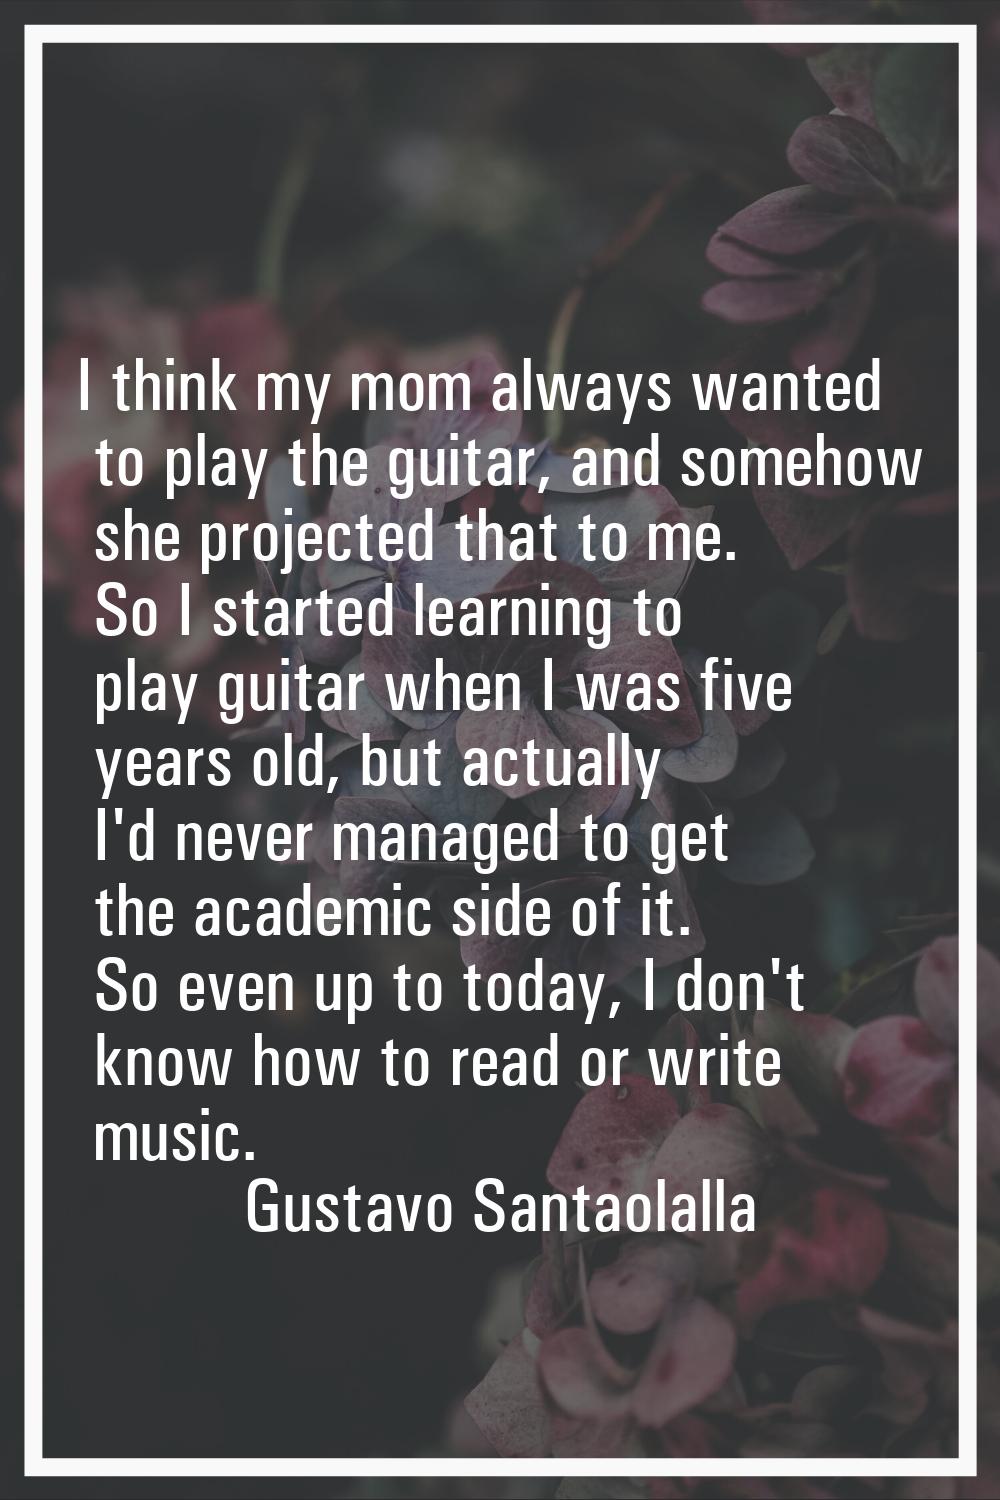 I think my mom always wanted to play the guitar, and somehow she projected that to me. So I started